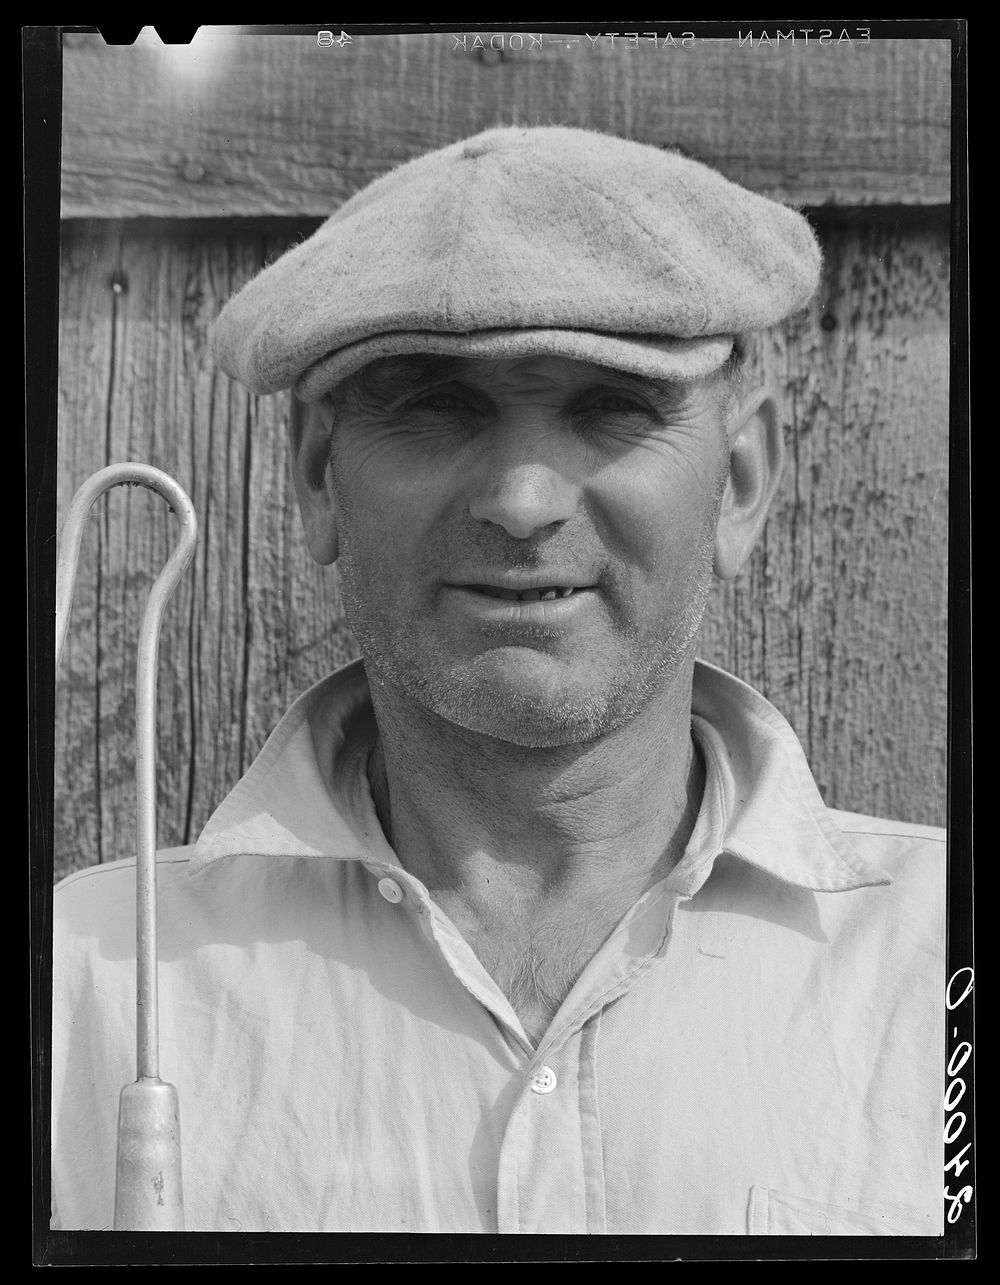 Sheepherder, Dangberg Ranch, Douglas County, Nevada. Sourced from the Library of Congress.